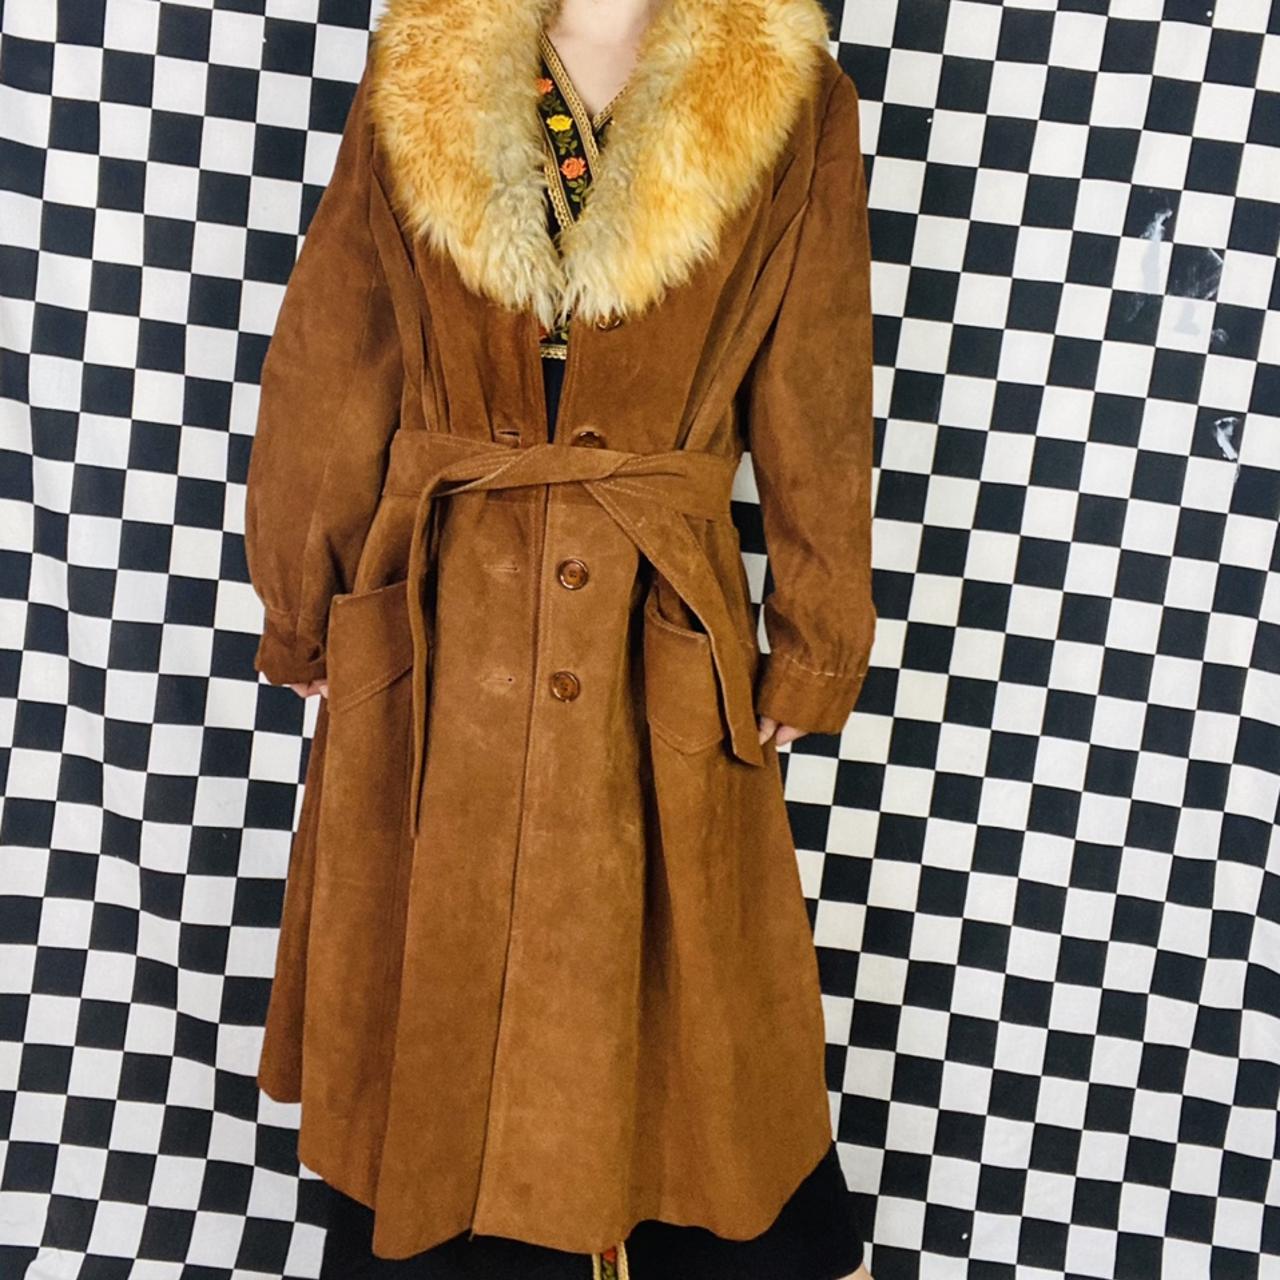 Vintage suede leather trench coat with fur collar.... - Depop